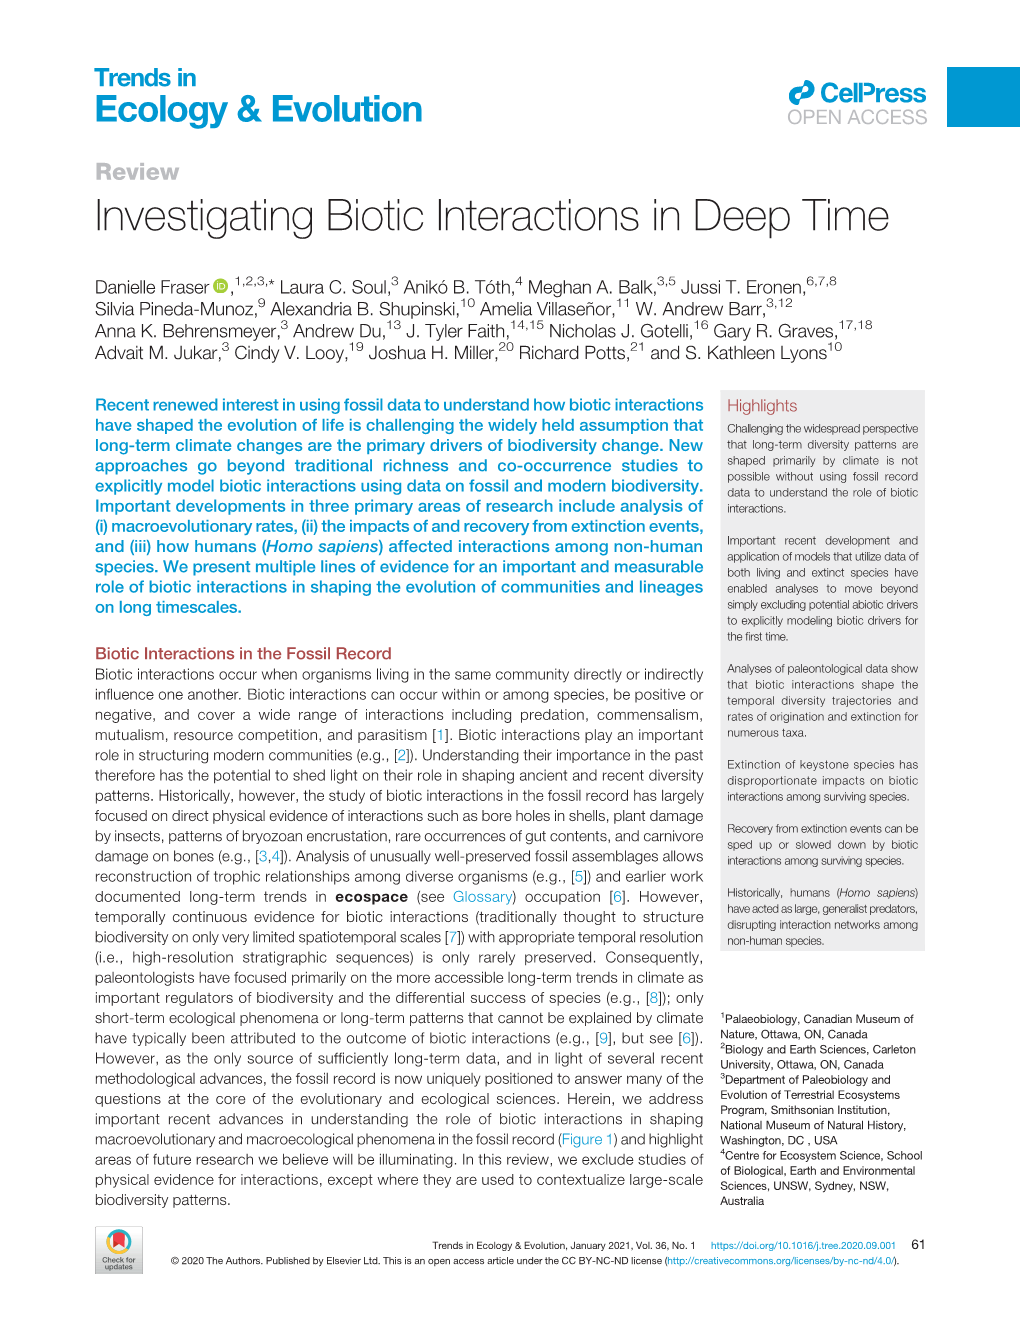 Investigating Biotic Interactions in Deep Time